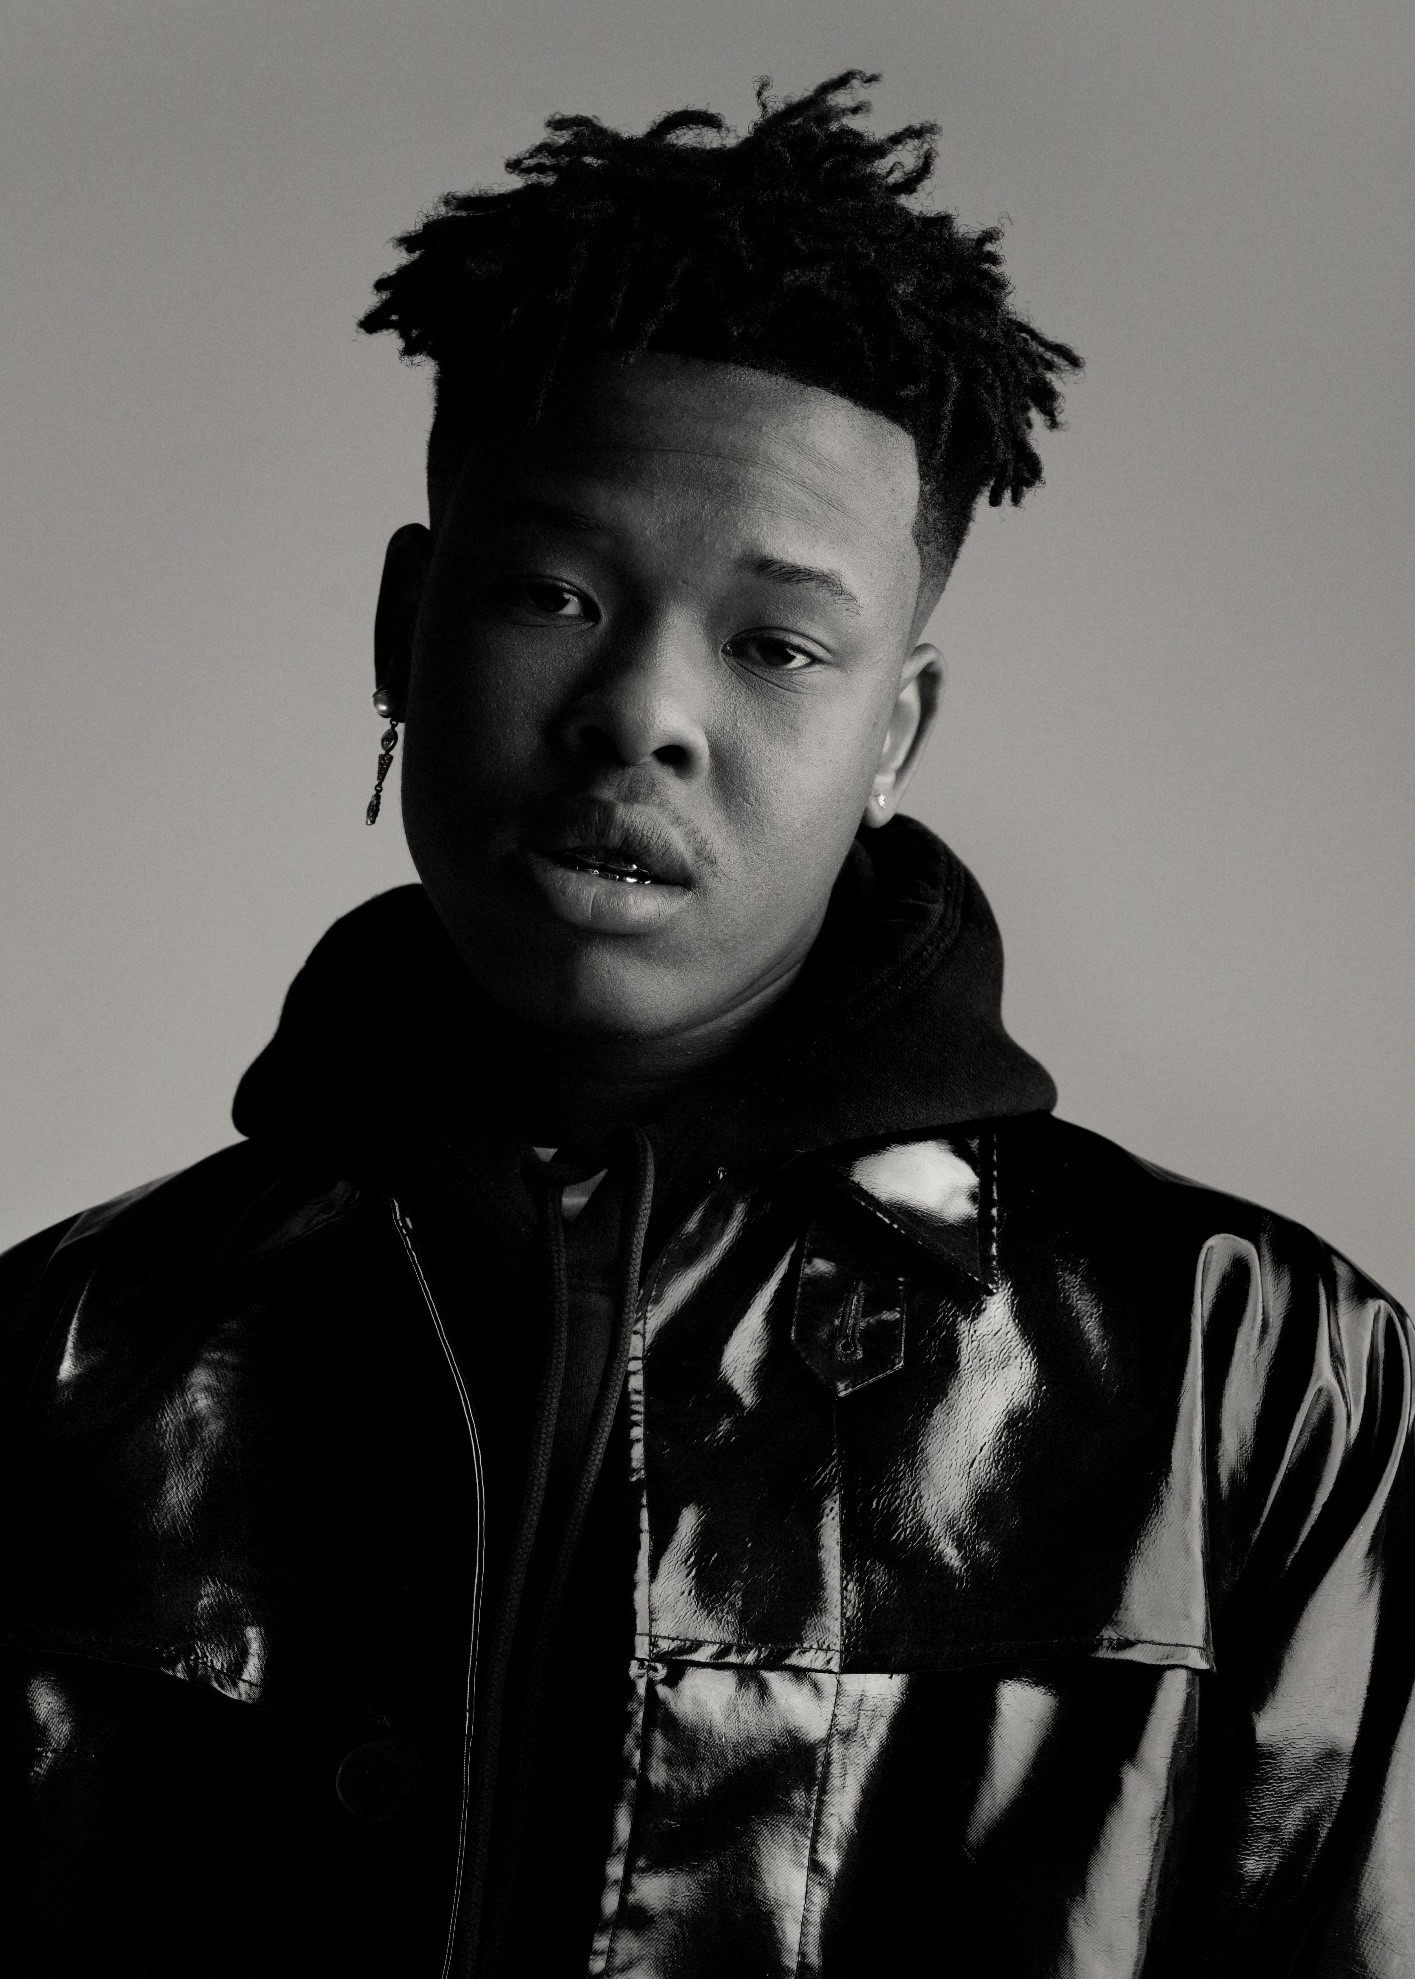 The Mystery of Nasty C’s Clout Chasing